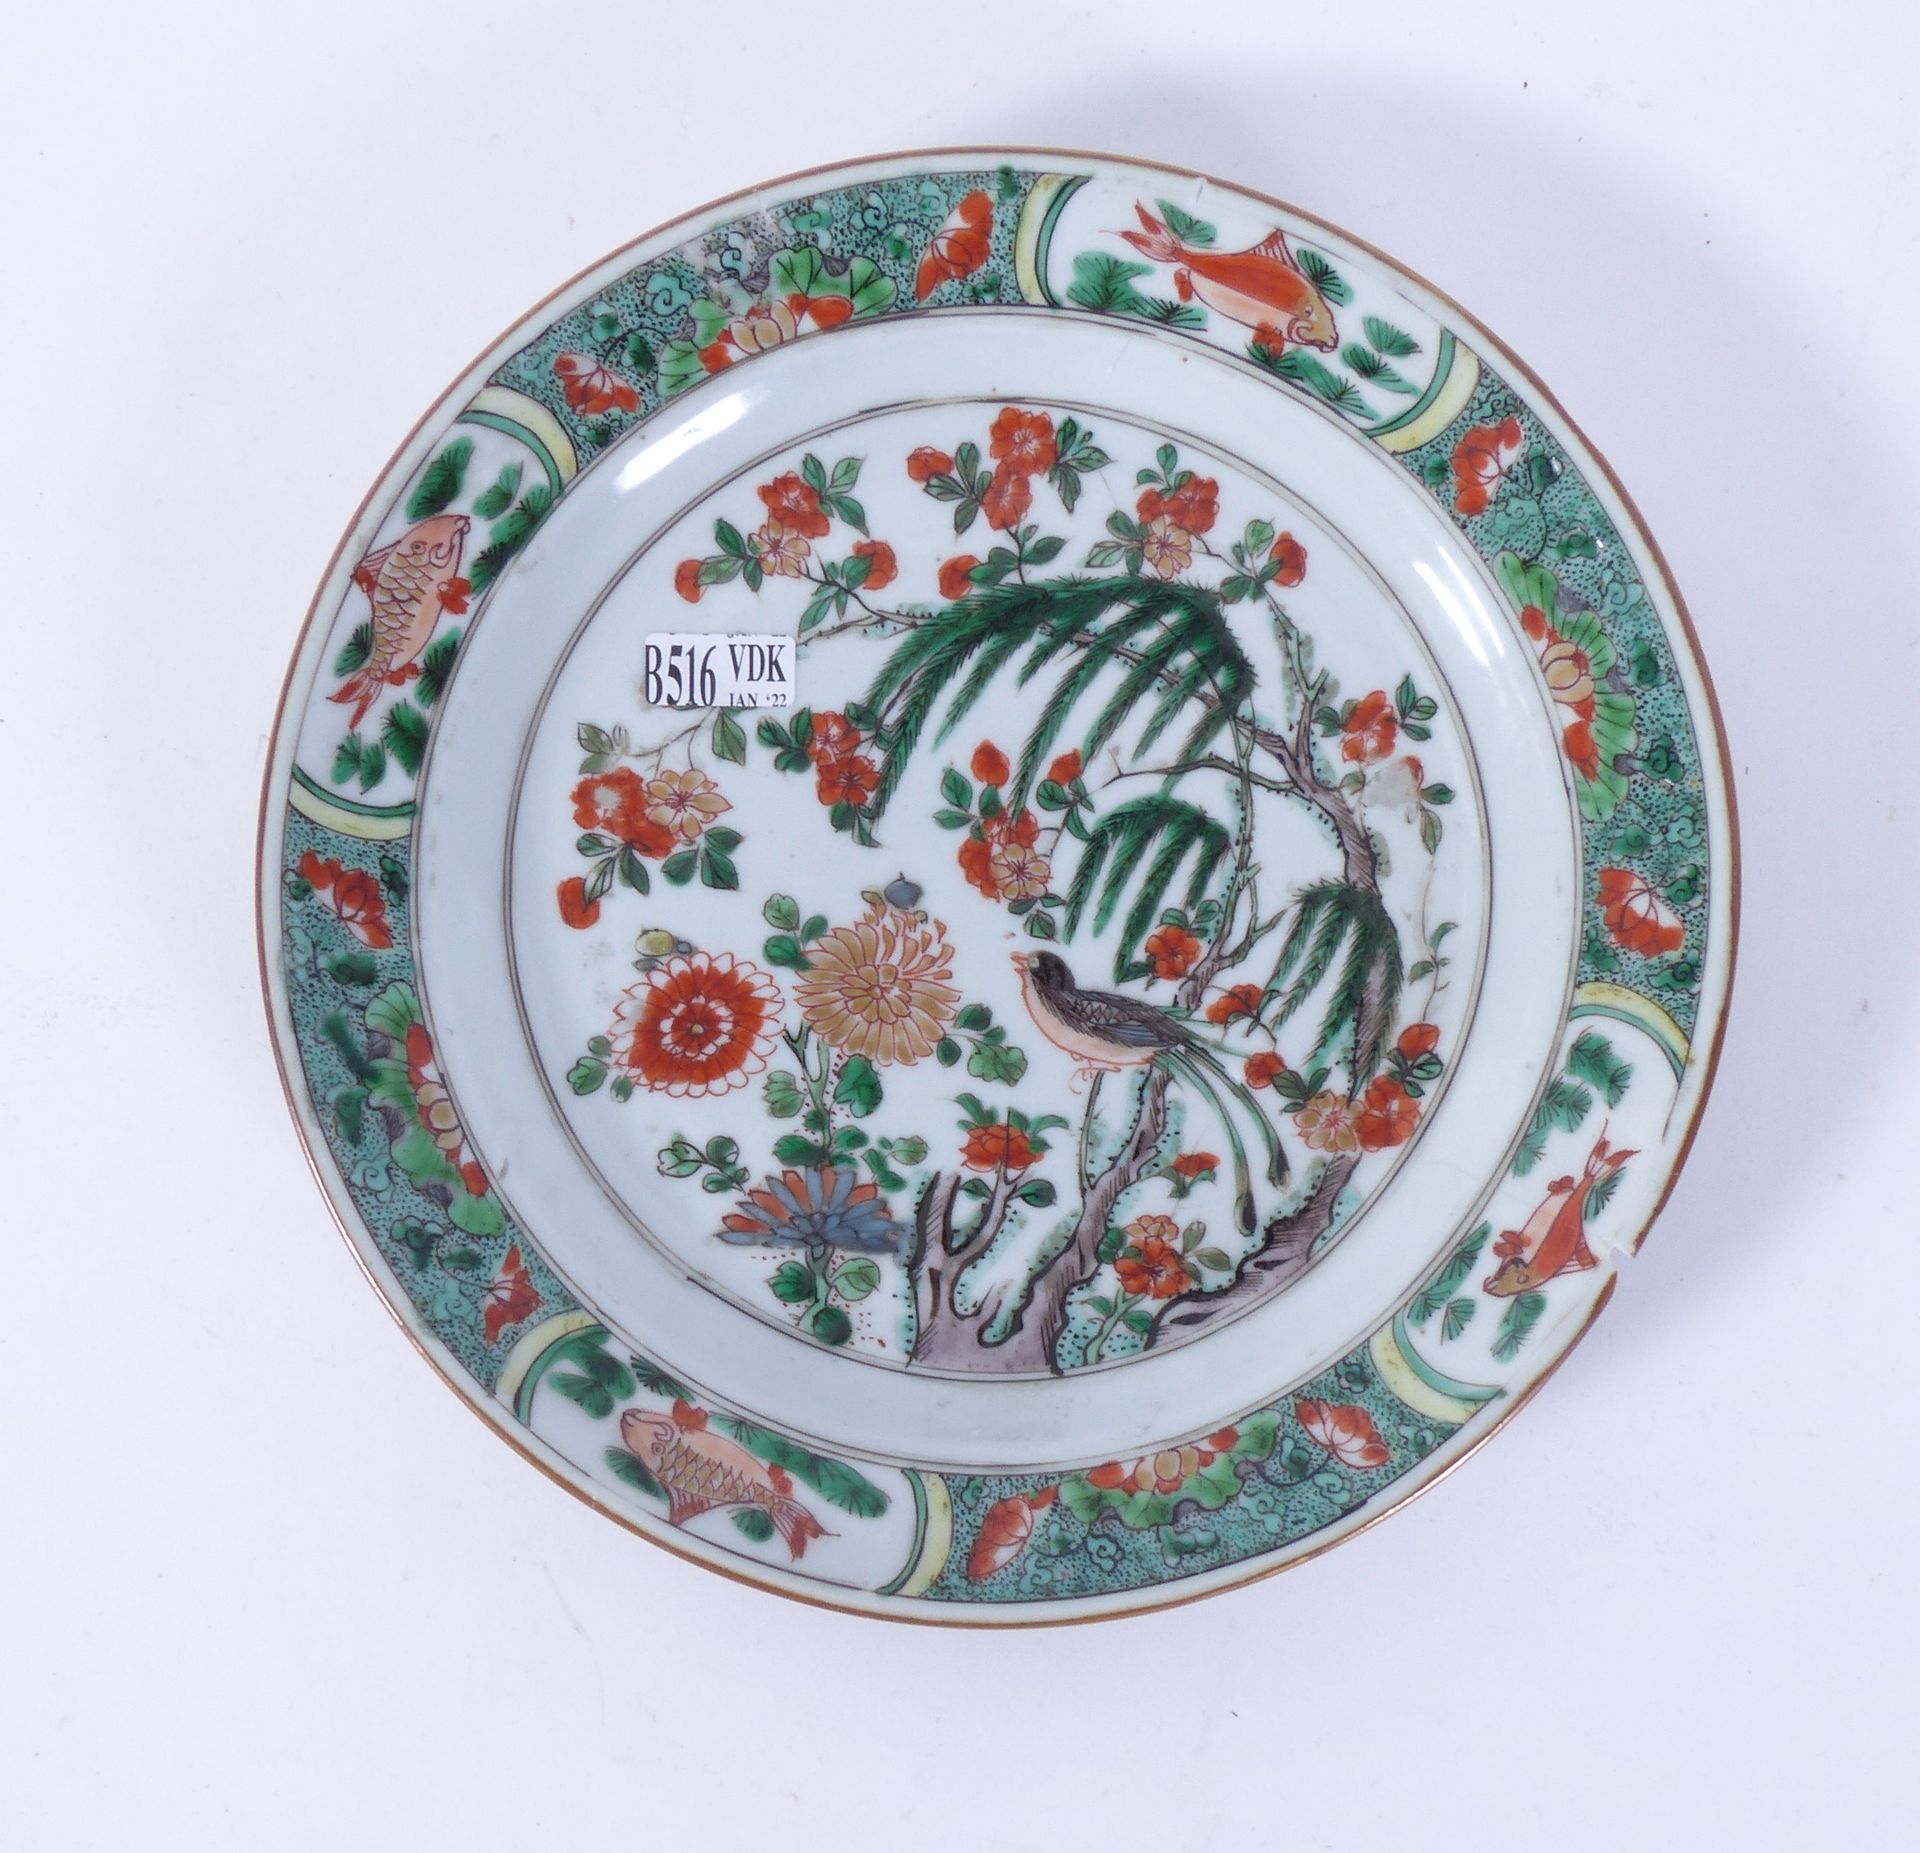 Null Plate in polychrome porcelain of China called "Green Family" decorated with&hellip;